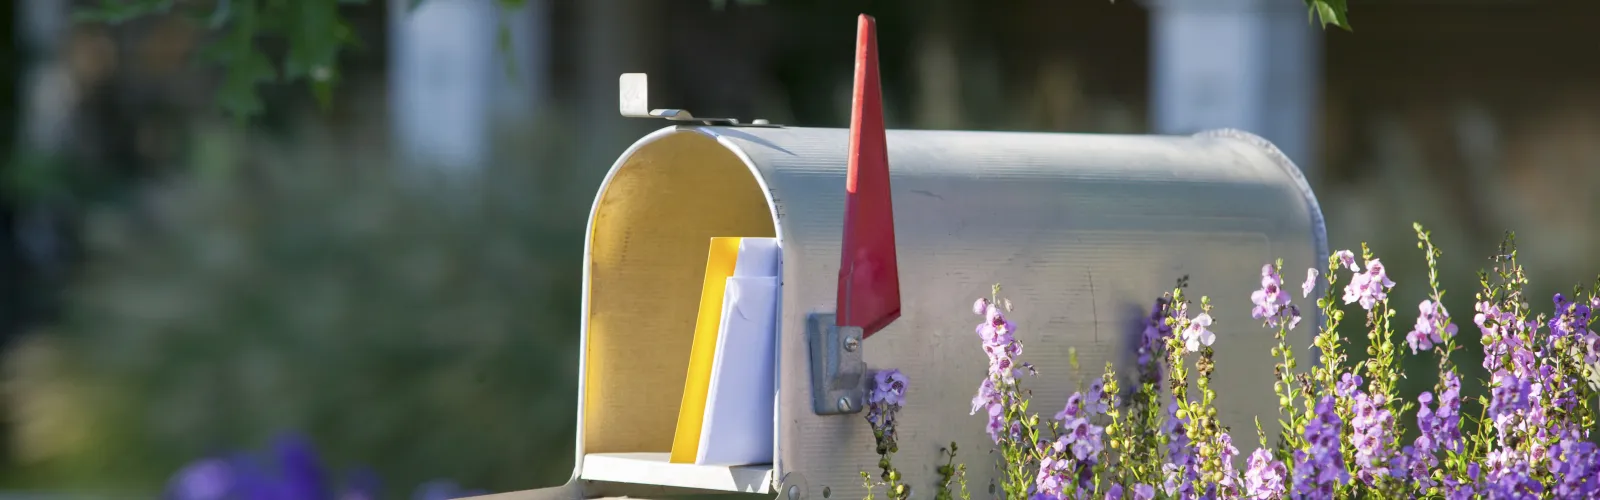 Mailbox with blooming purple flowers and maple tree branches